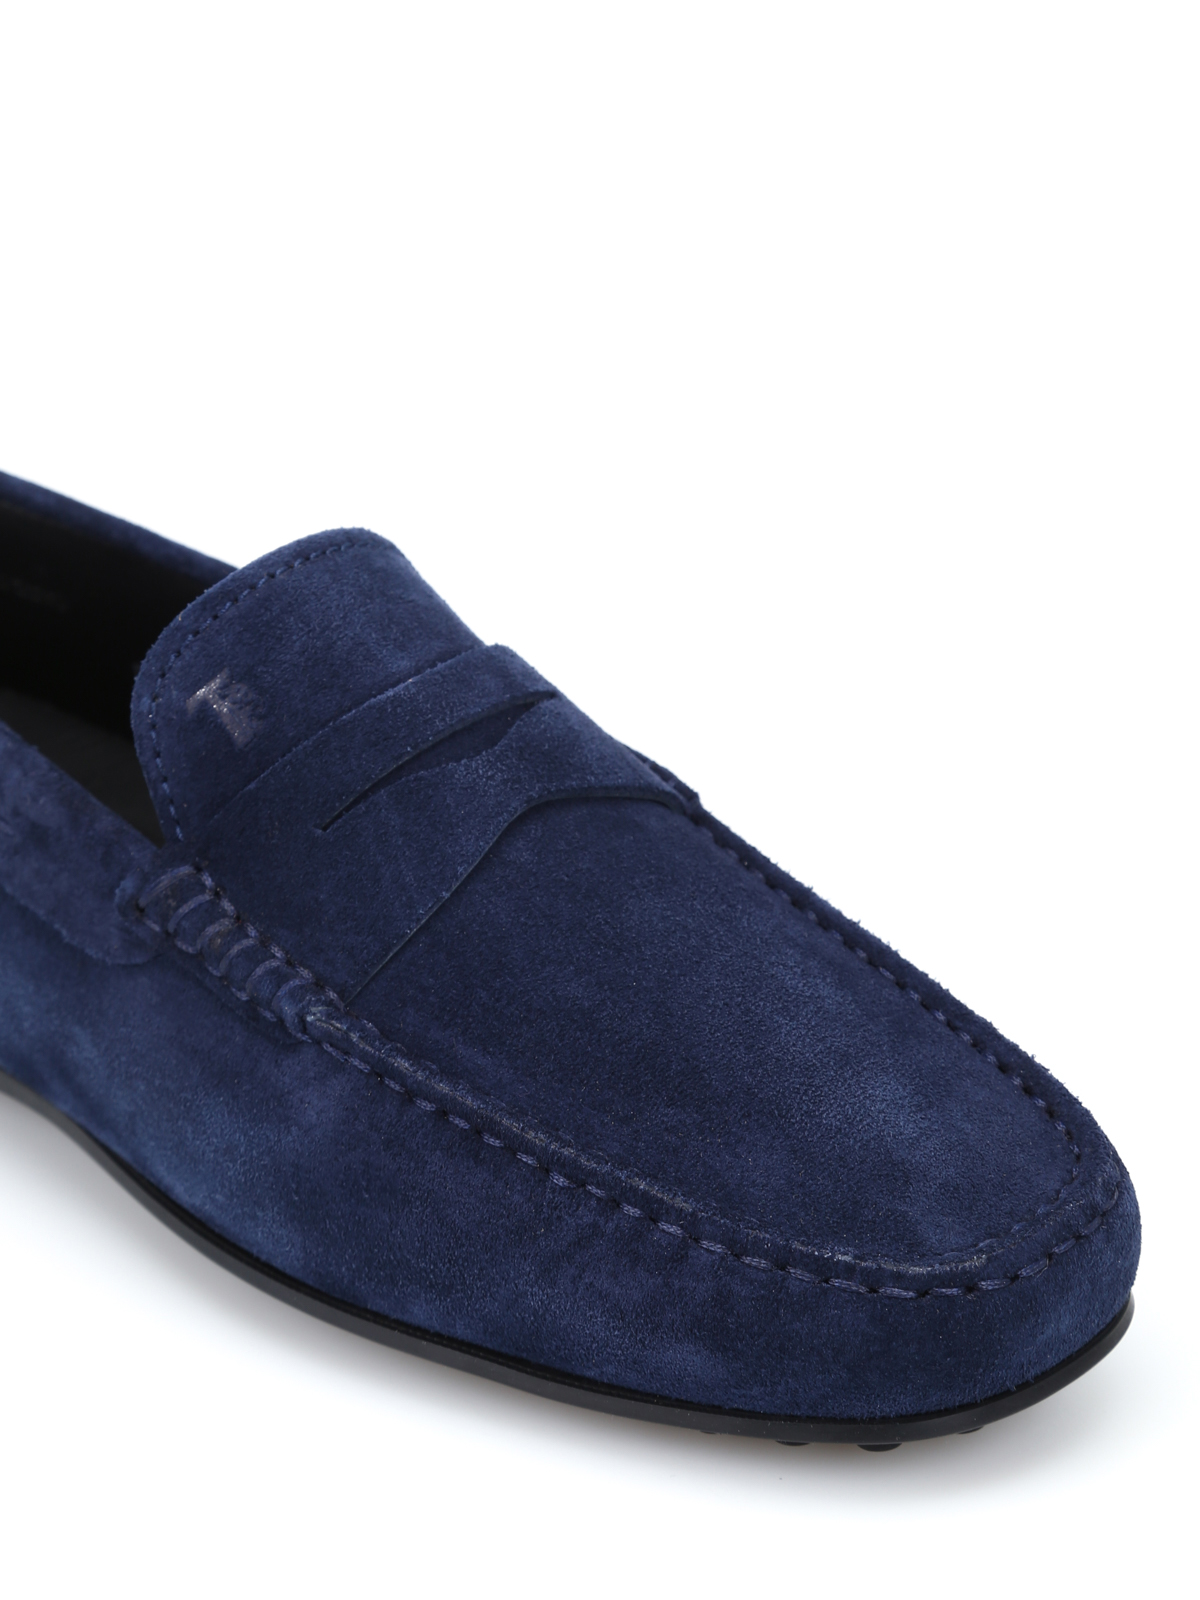 Loafers & Slippers - Gommino blue loafers - XXM0LR00011RE0U820